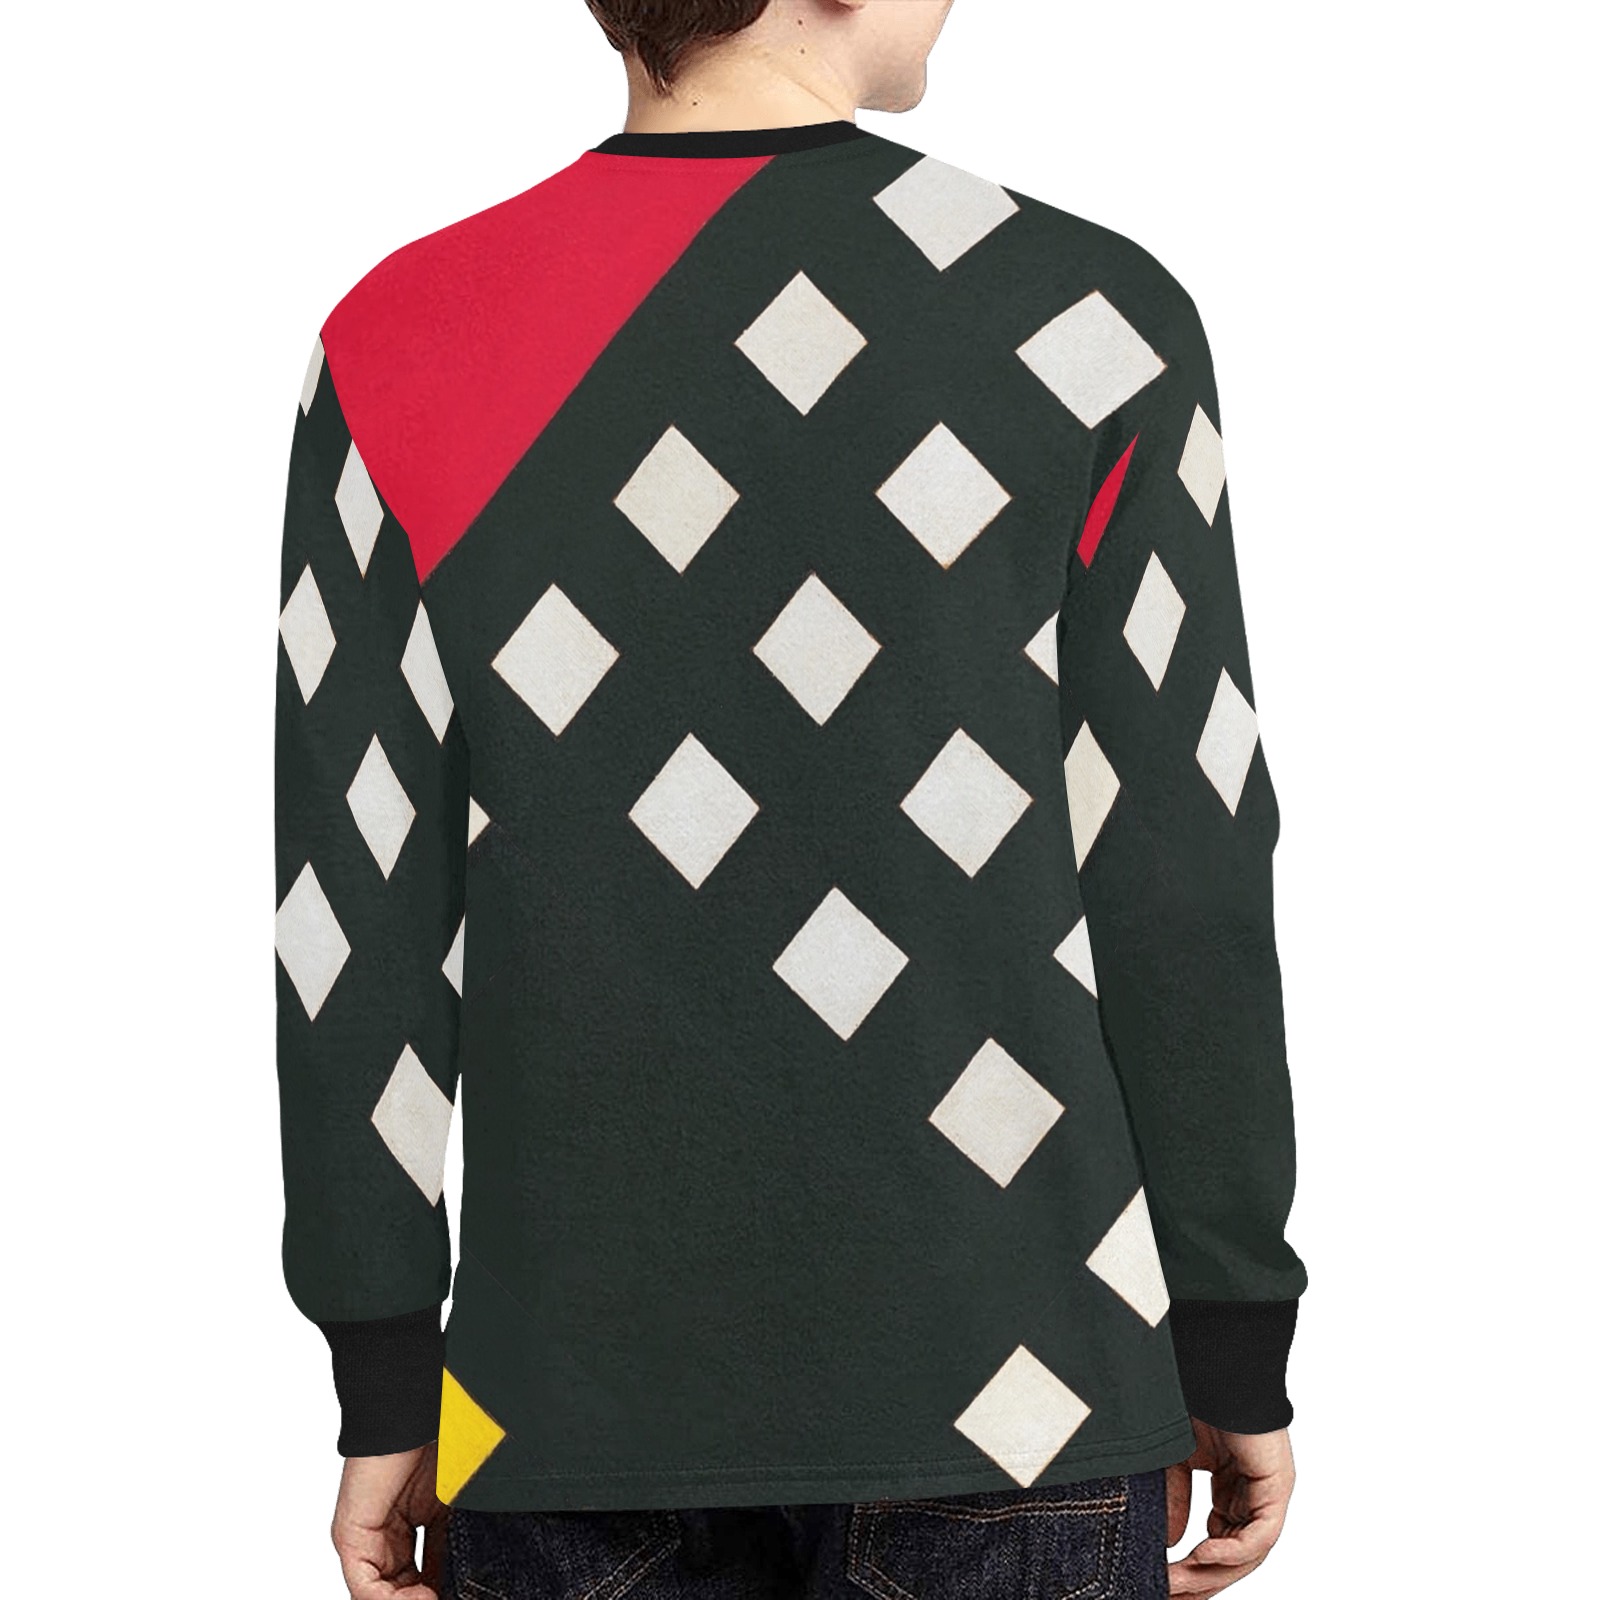 Counter-composition XV by Theo van Doesburg- Kids' Rib Cuff Long Sleeve T-shirt (Model T64)